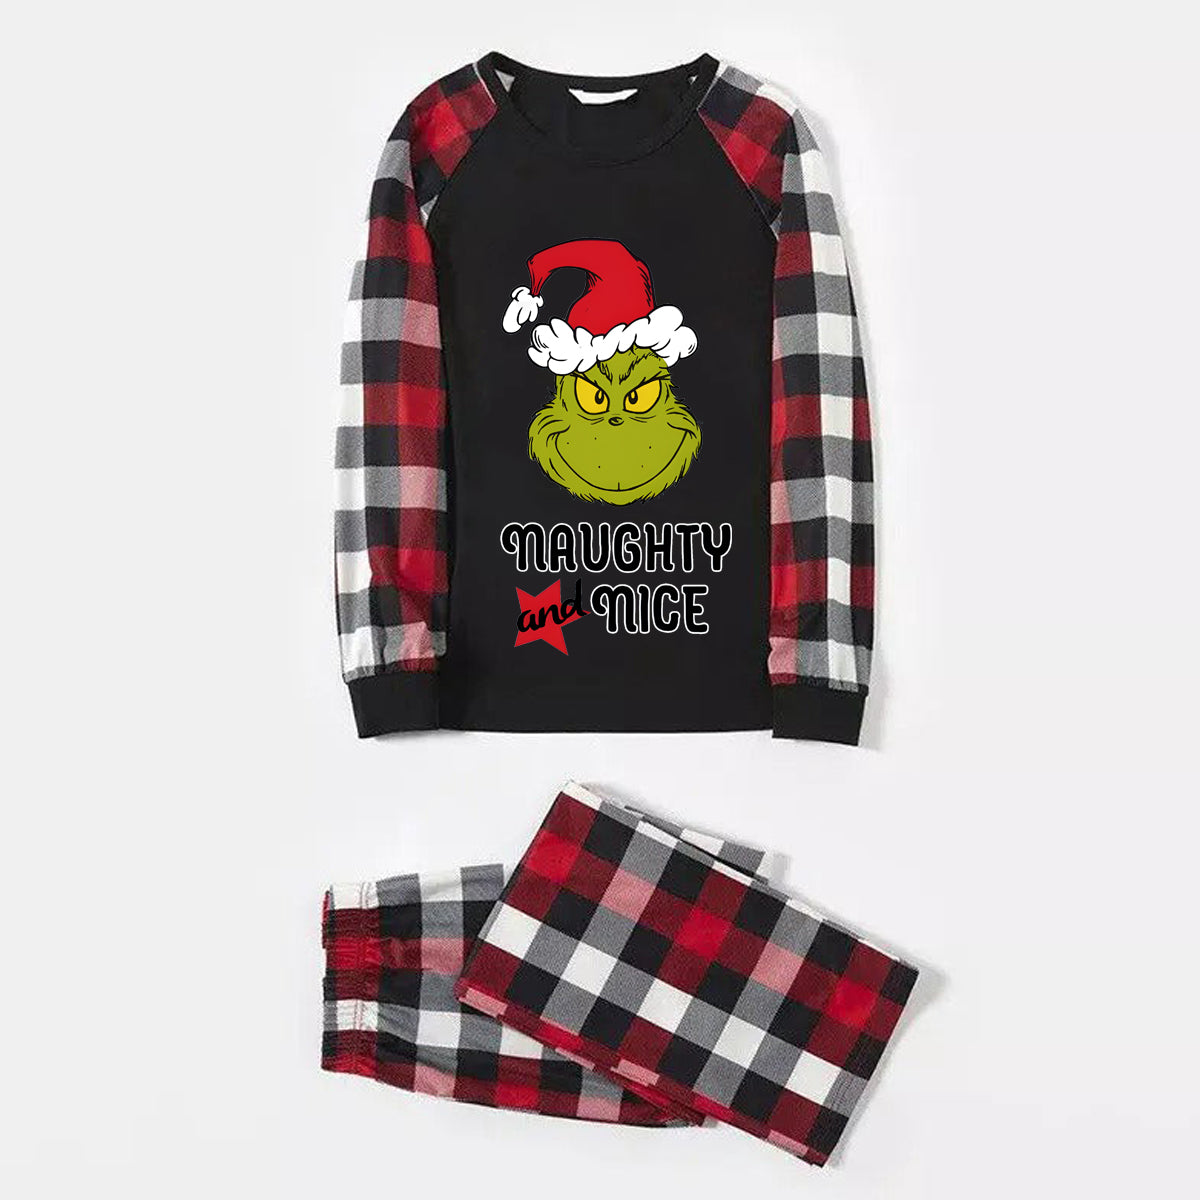 Christmas "Naughty&Nice" Letter Print Patterned Casual Long Sleeve Sweatshirts Contrast Tops and Red & Black & White Plaid Pants Family Matching Pajamas Set With Pet Bandana